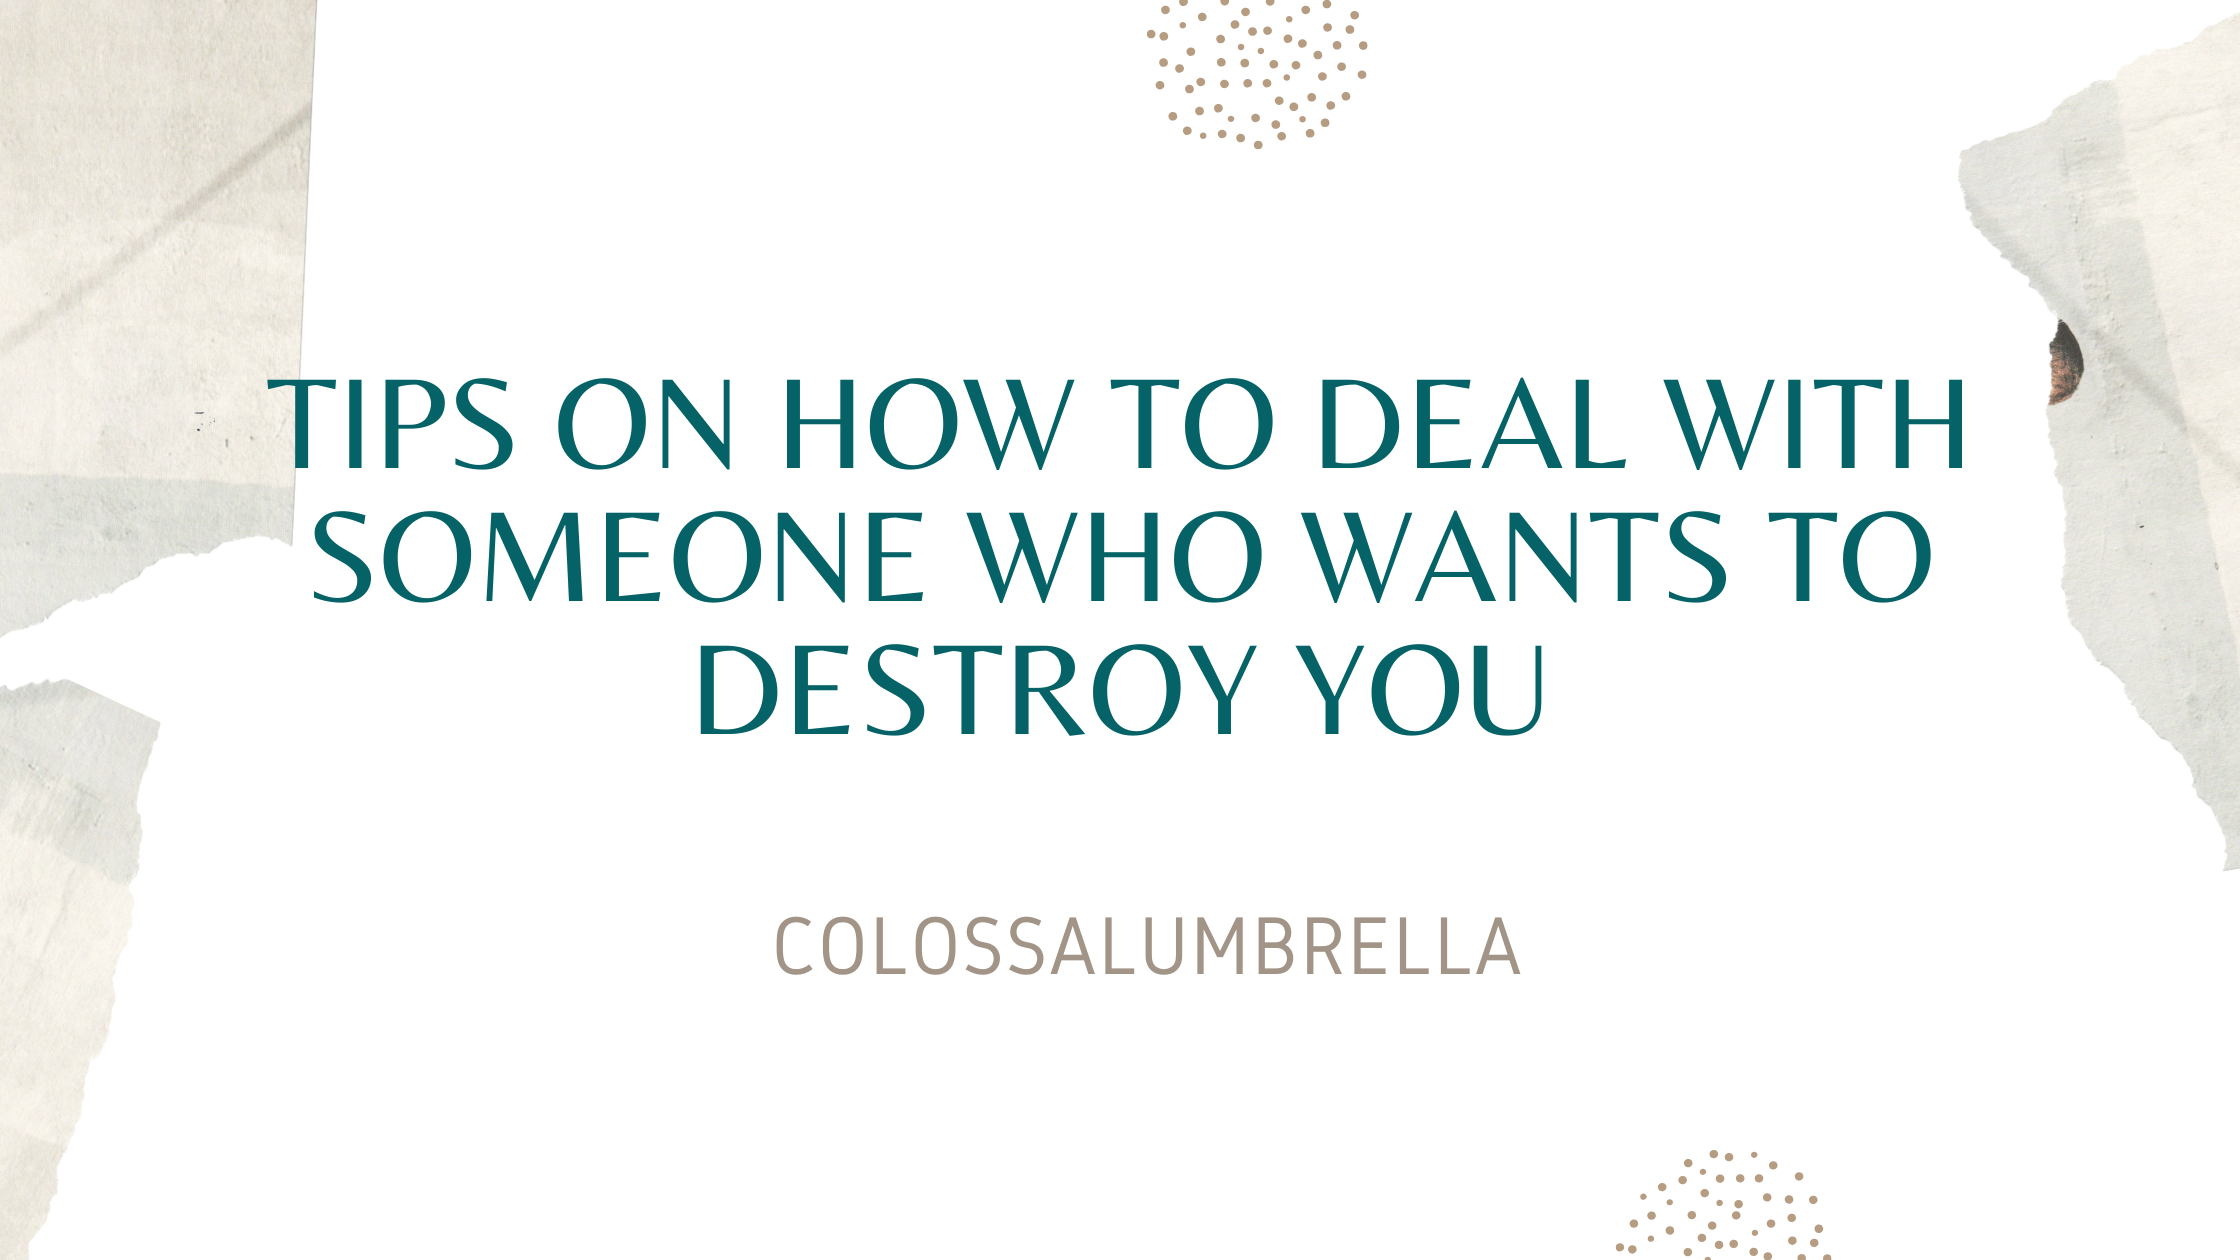 8 Tips on how to deal with someone who wants to destroy you